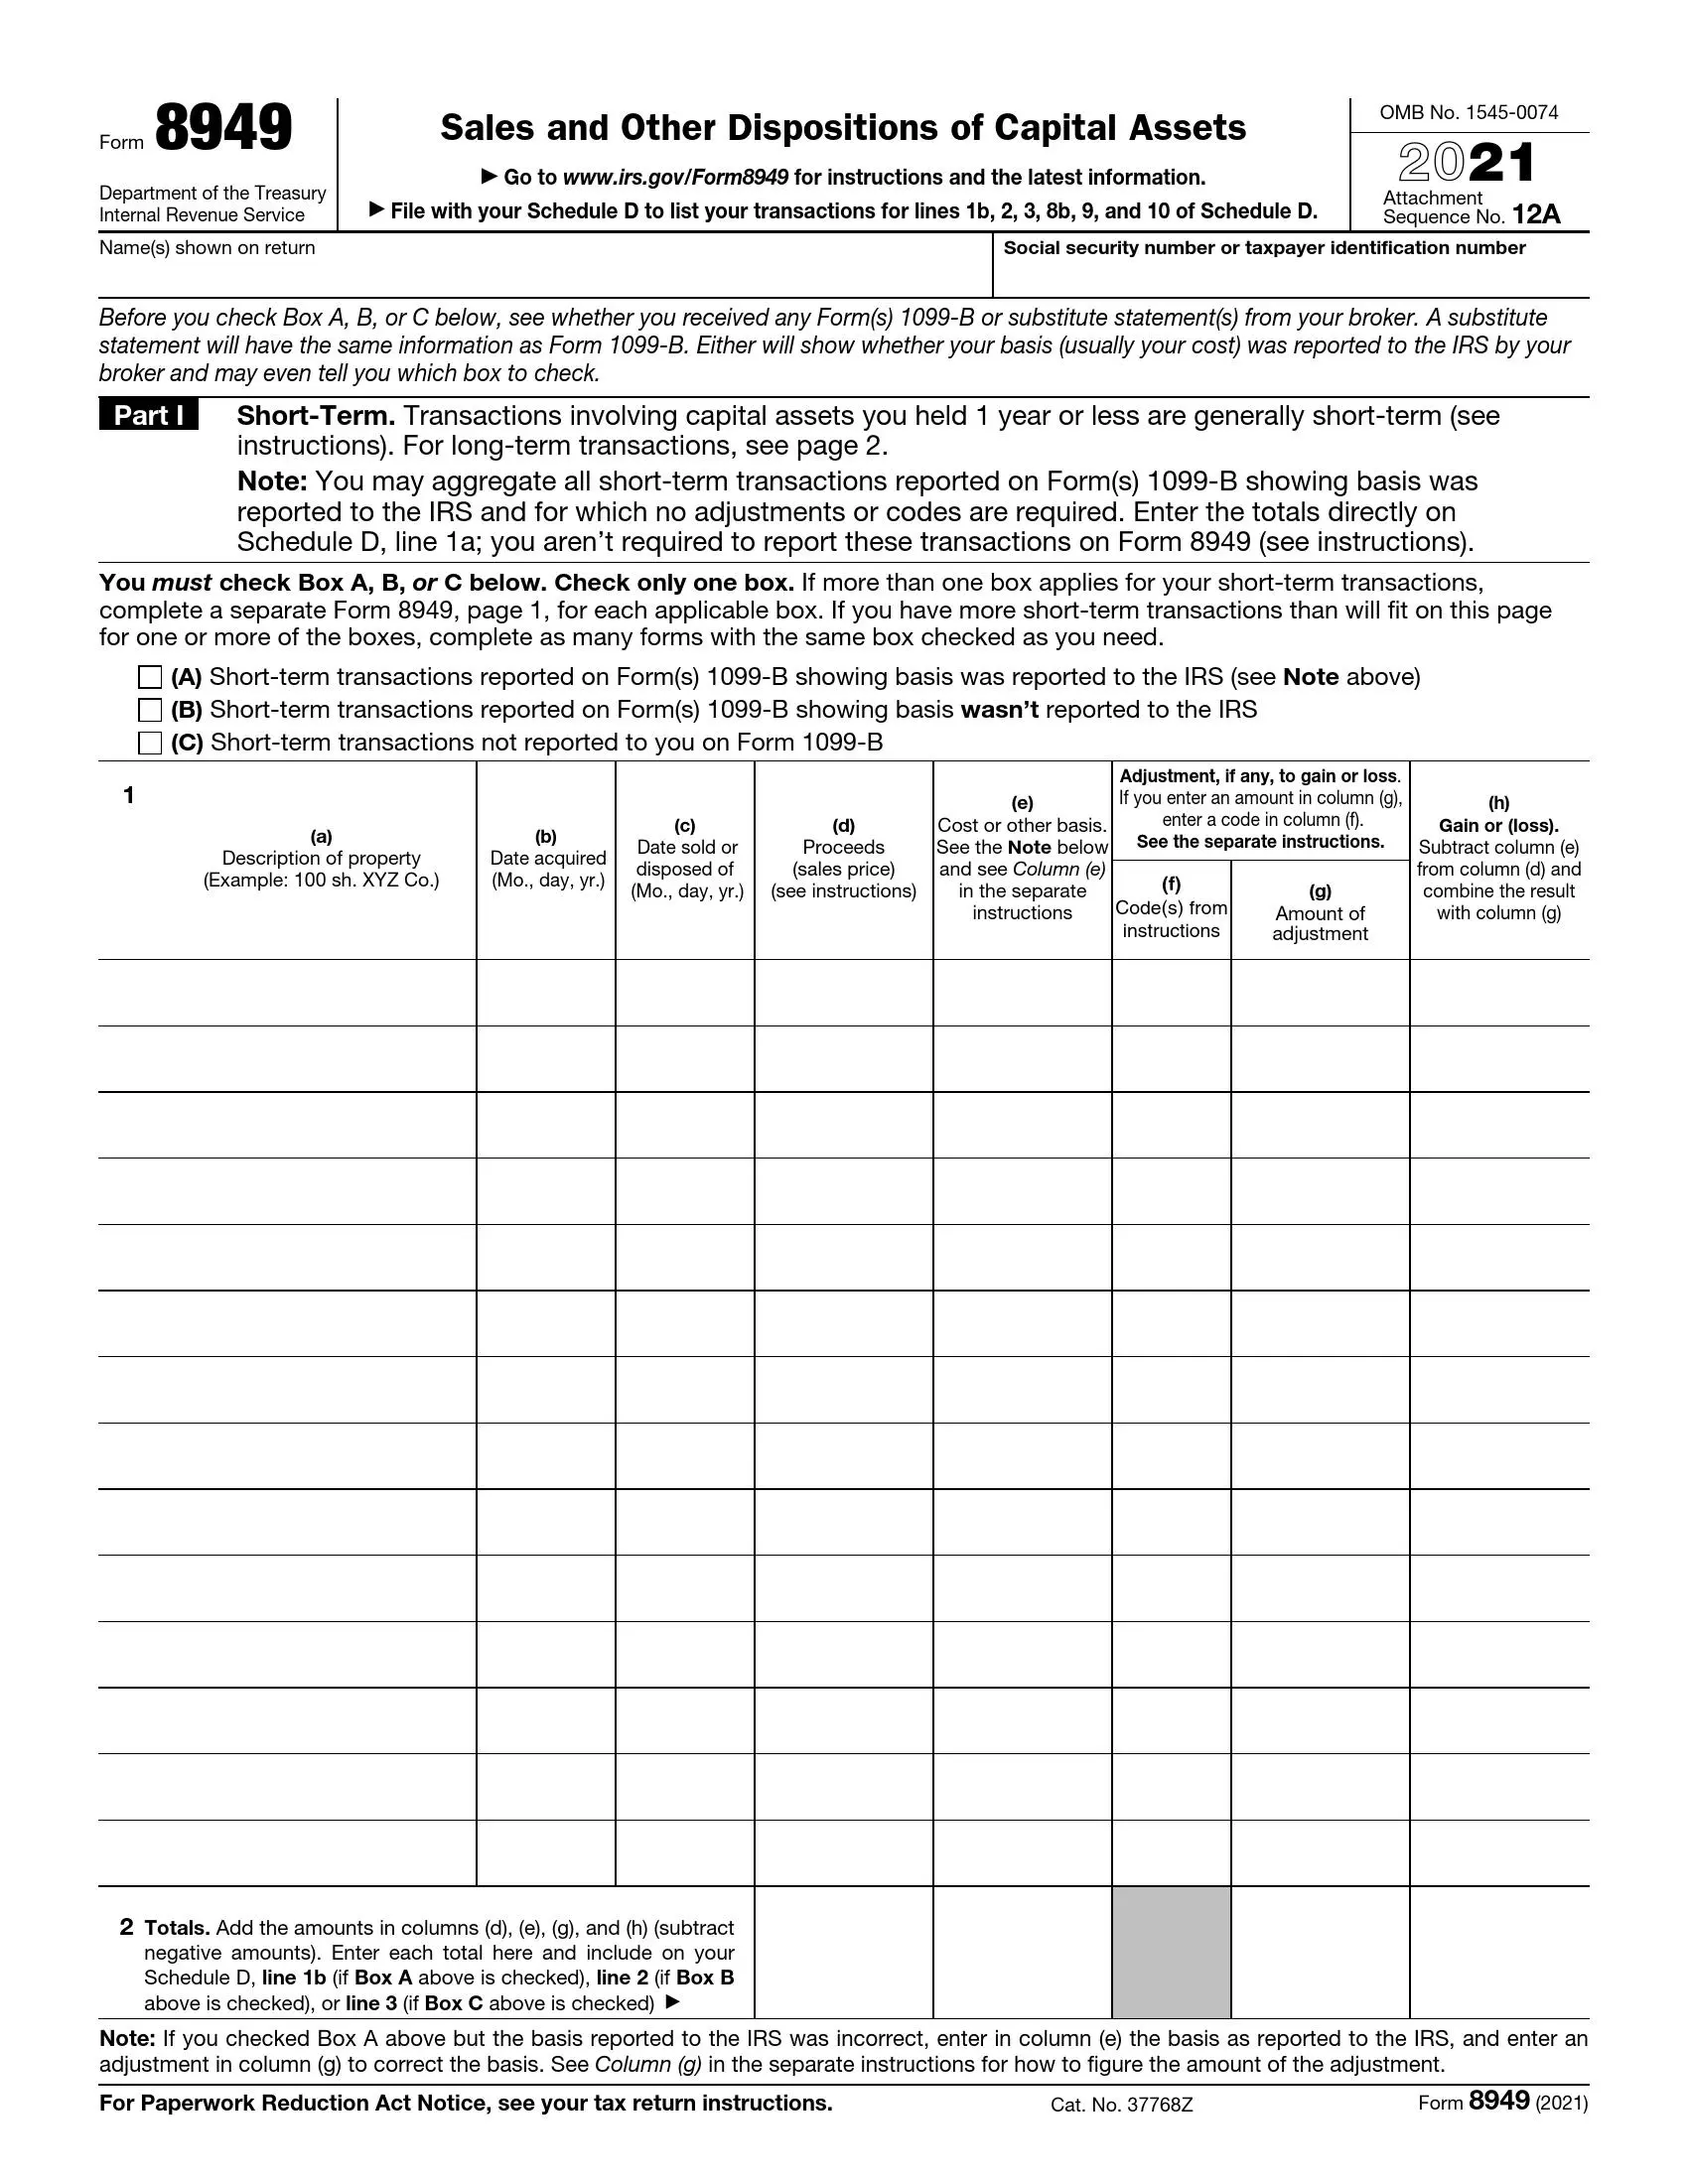 irs form 8949 2021 preview